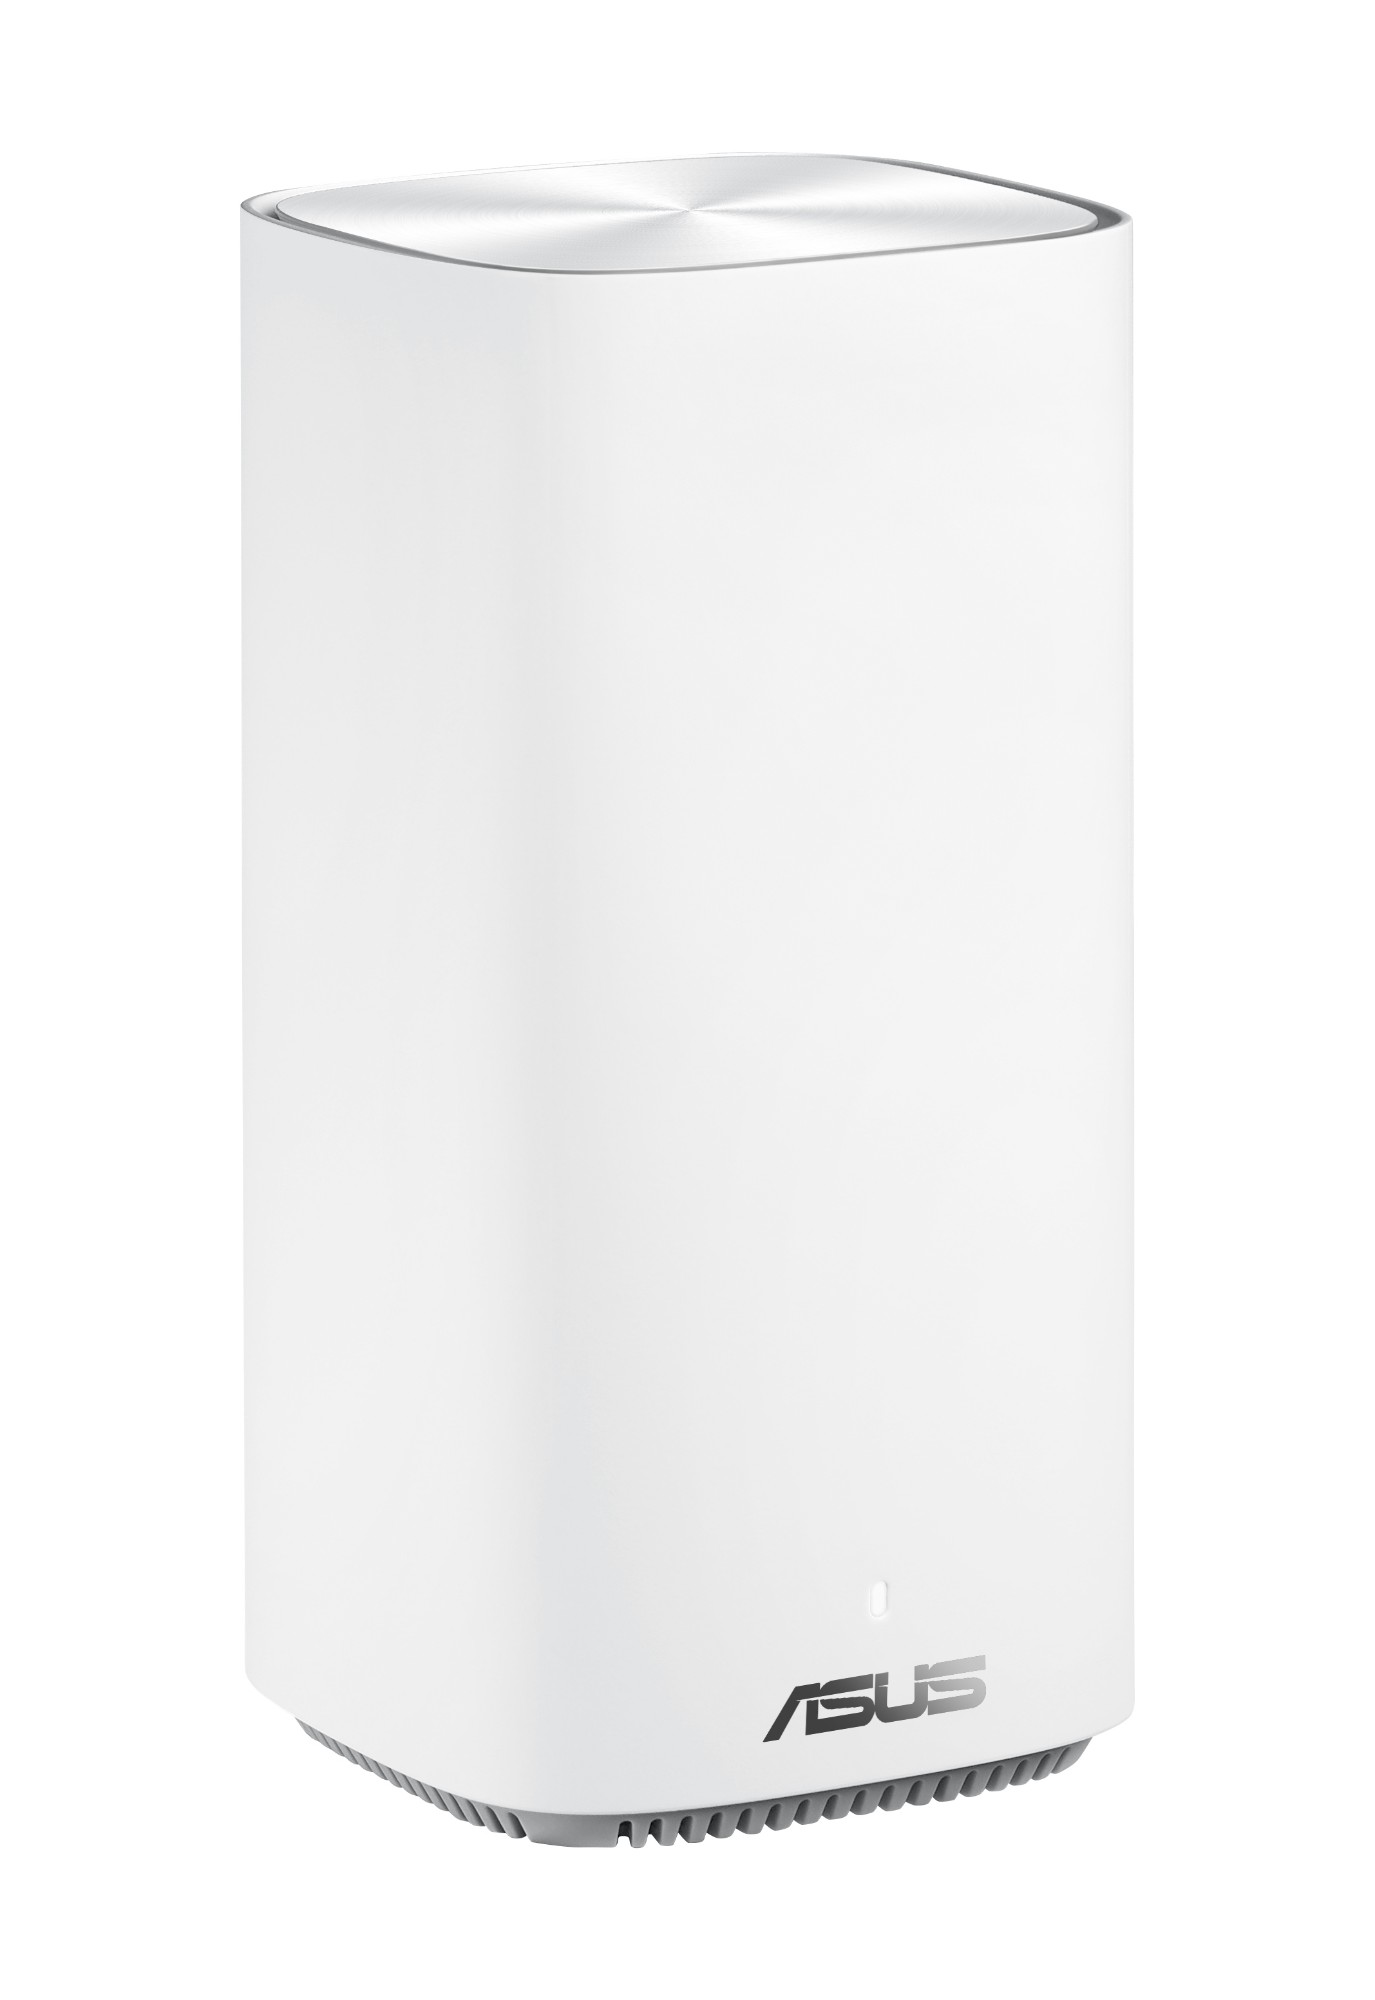 Asus - ASUS ZenWiFi AC (CD6) AC1500 Mesh System, Pack of 1 - White